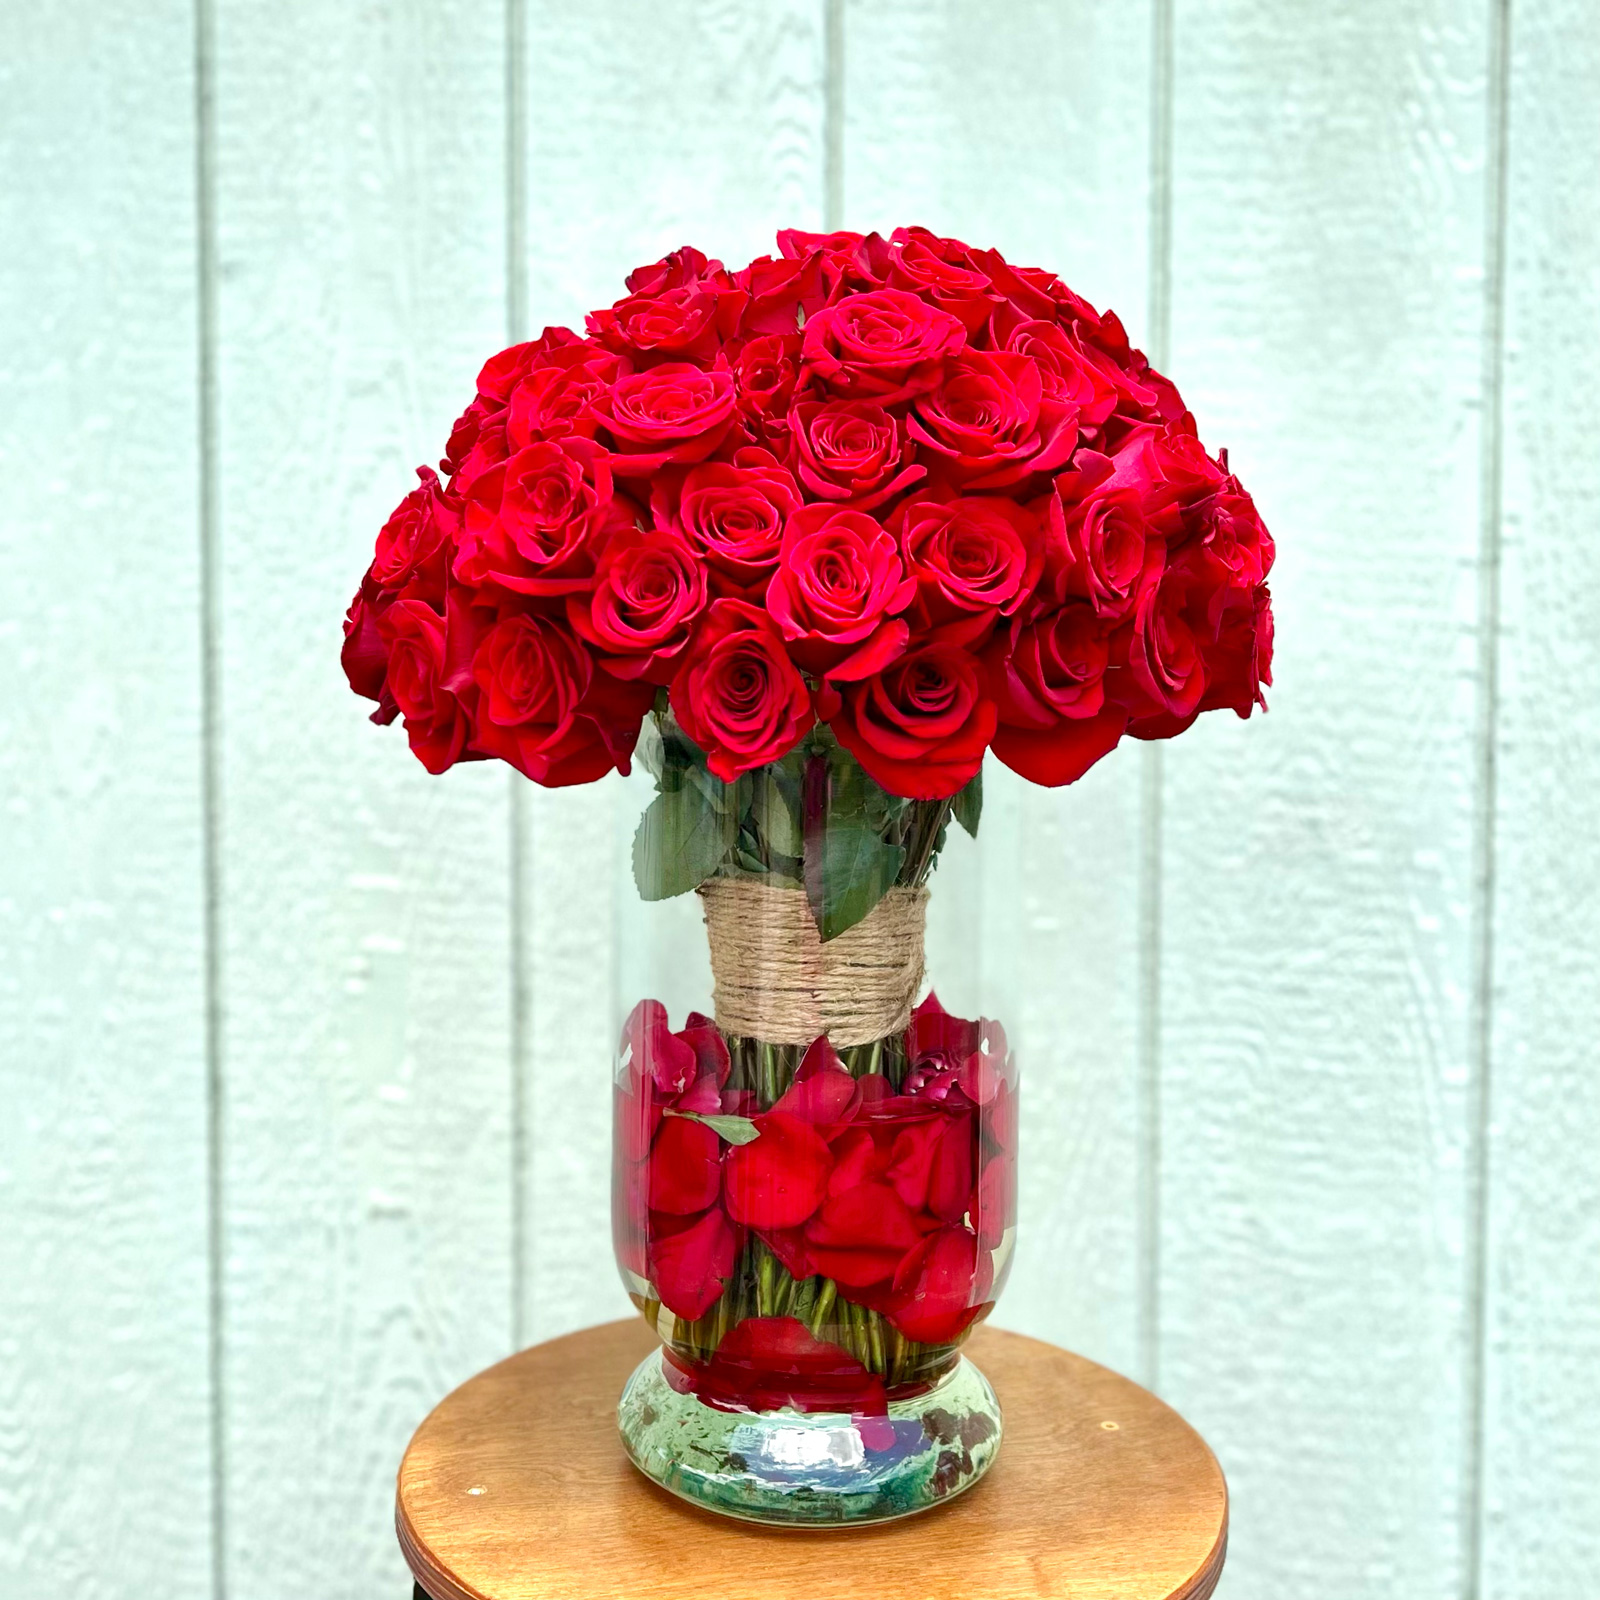 100 red roses by Annaville Florist in Corpus Christi, Texas